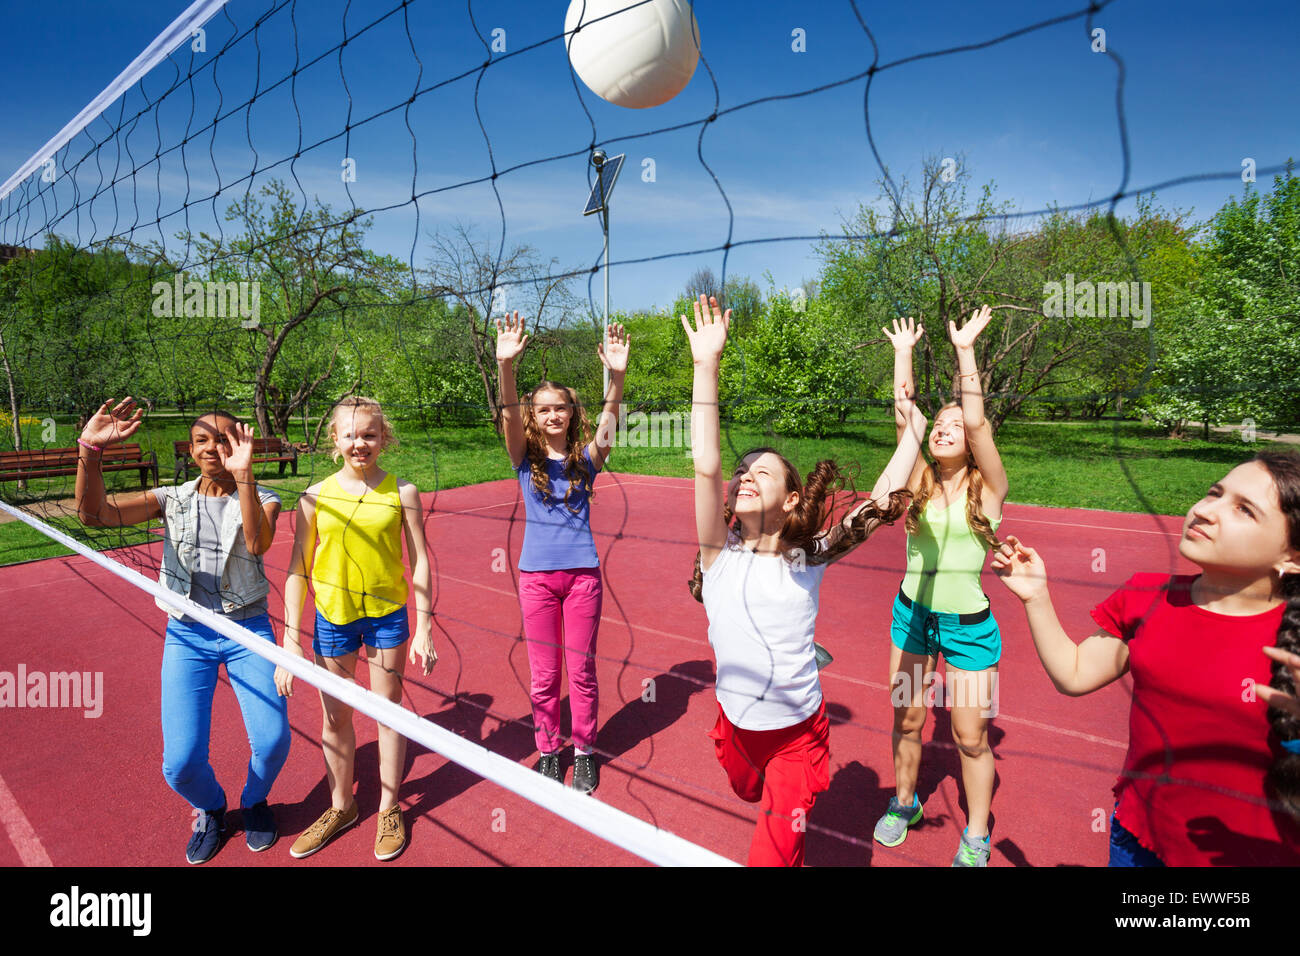 Volleyball game with playing teenage children Stock Photo